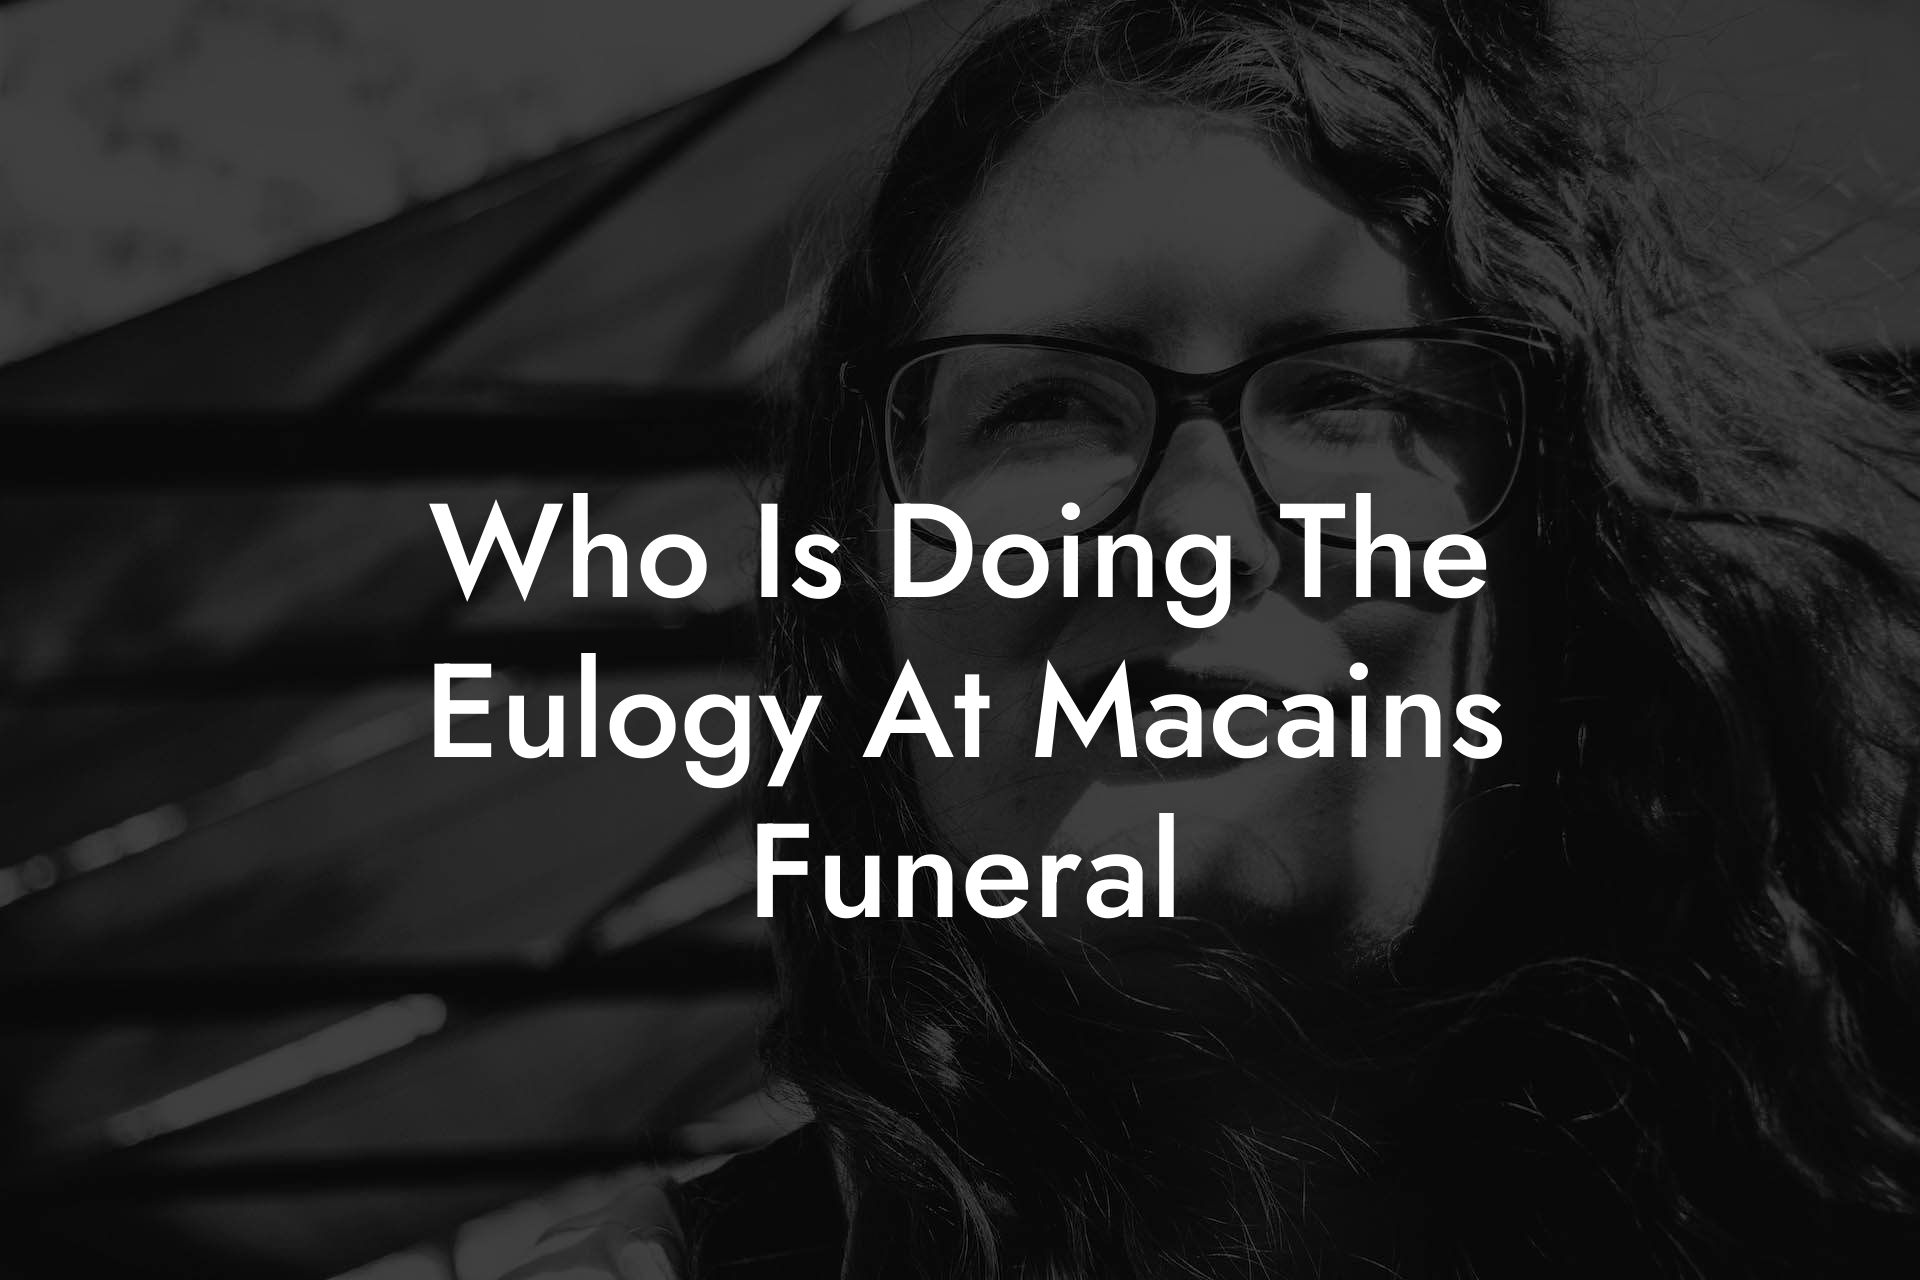 Who Is Doing The Eulogy At Macains Funeral